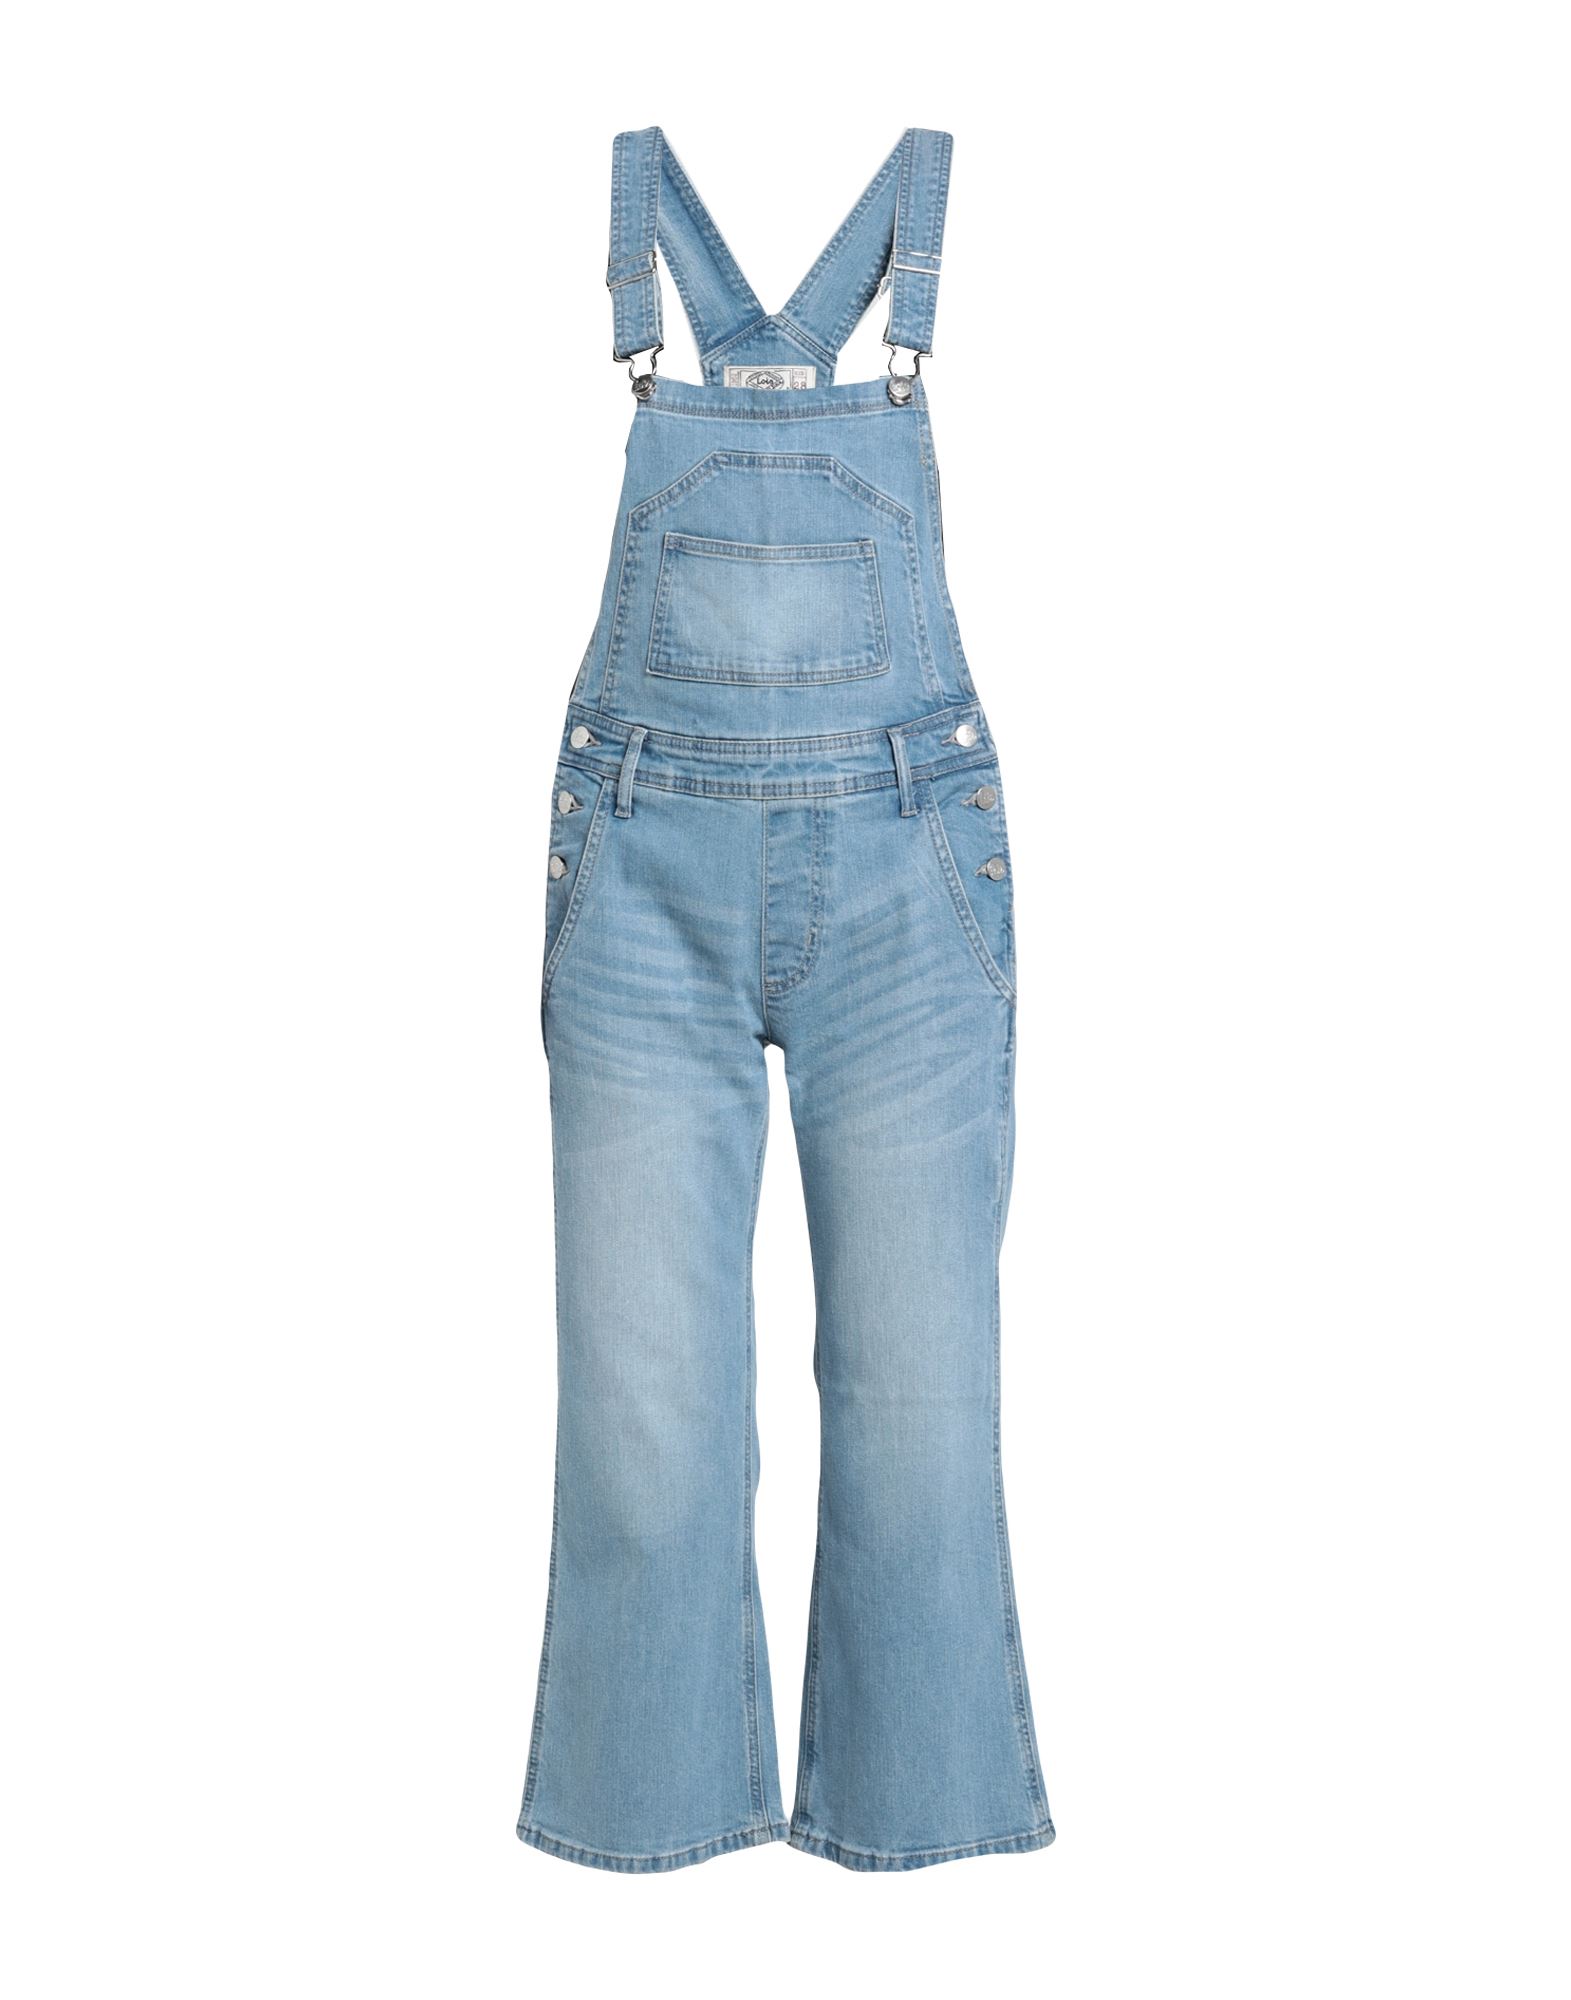 LOIS Overalls